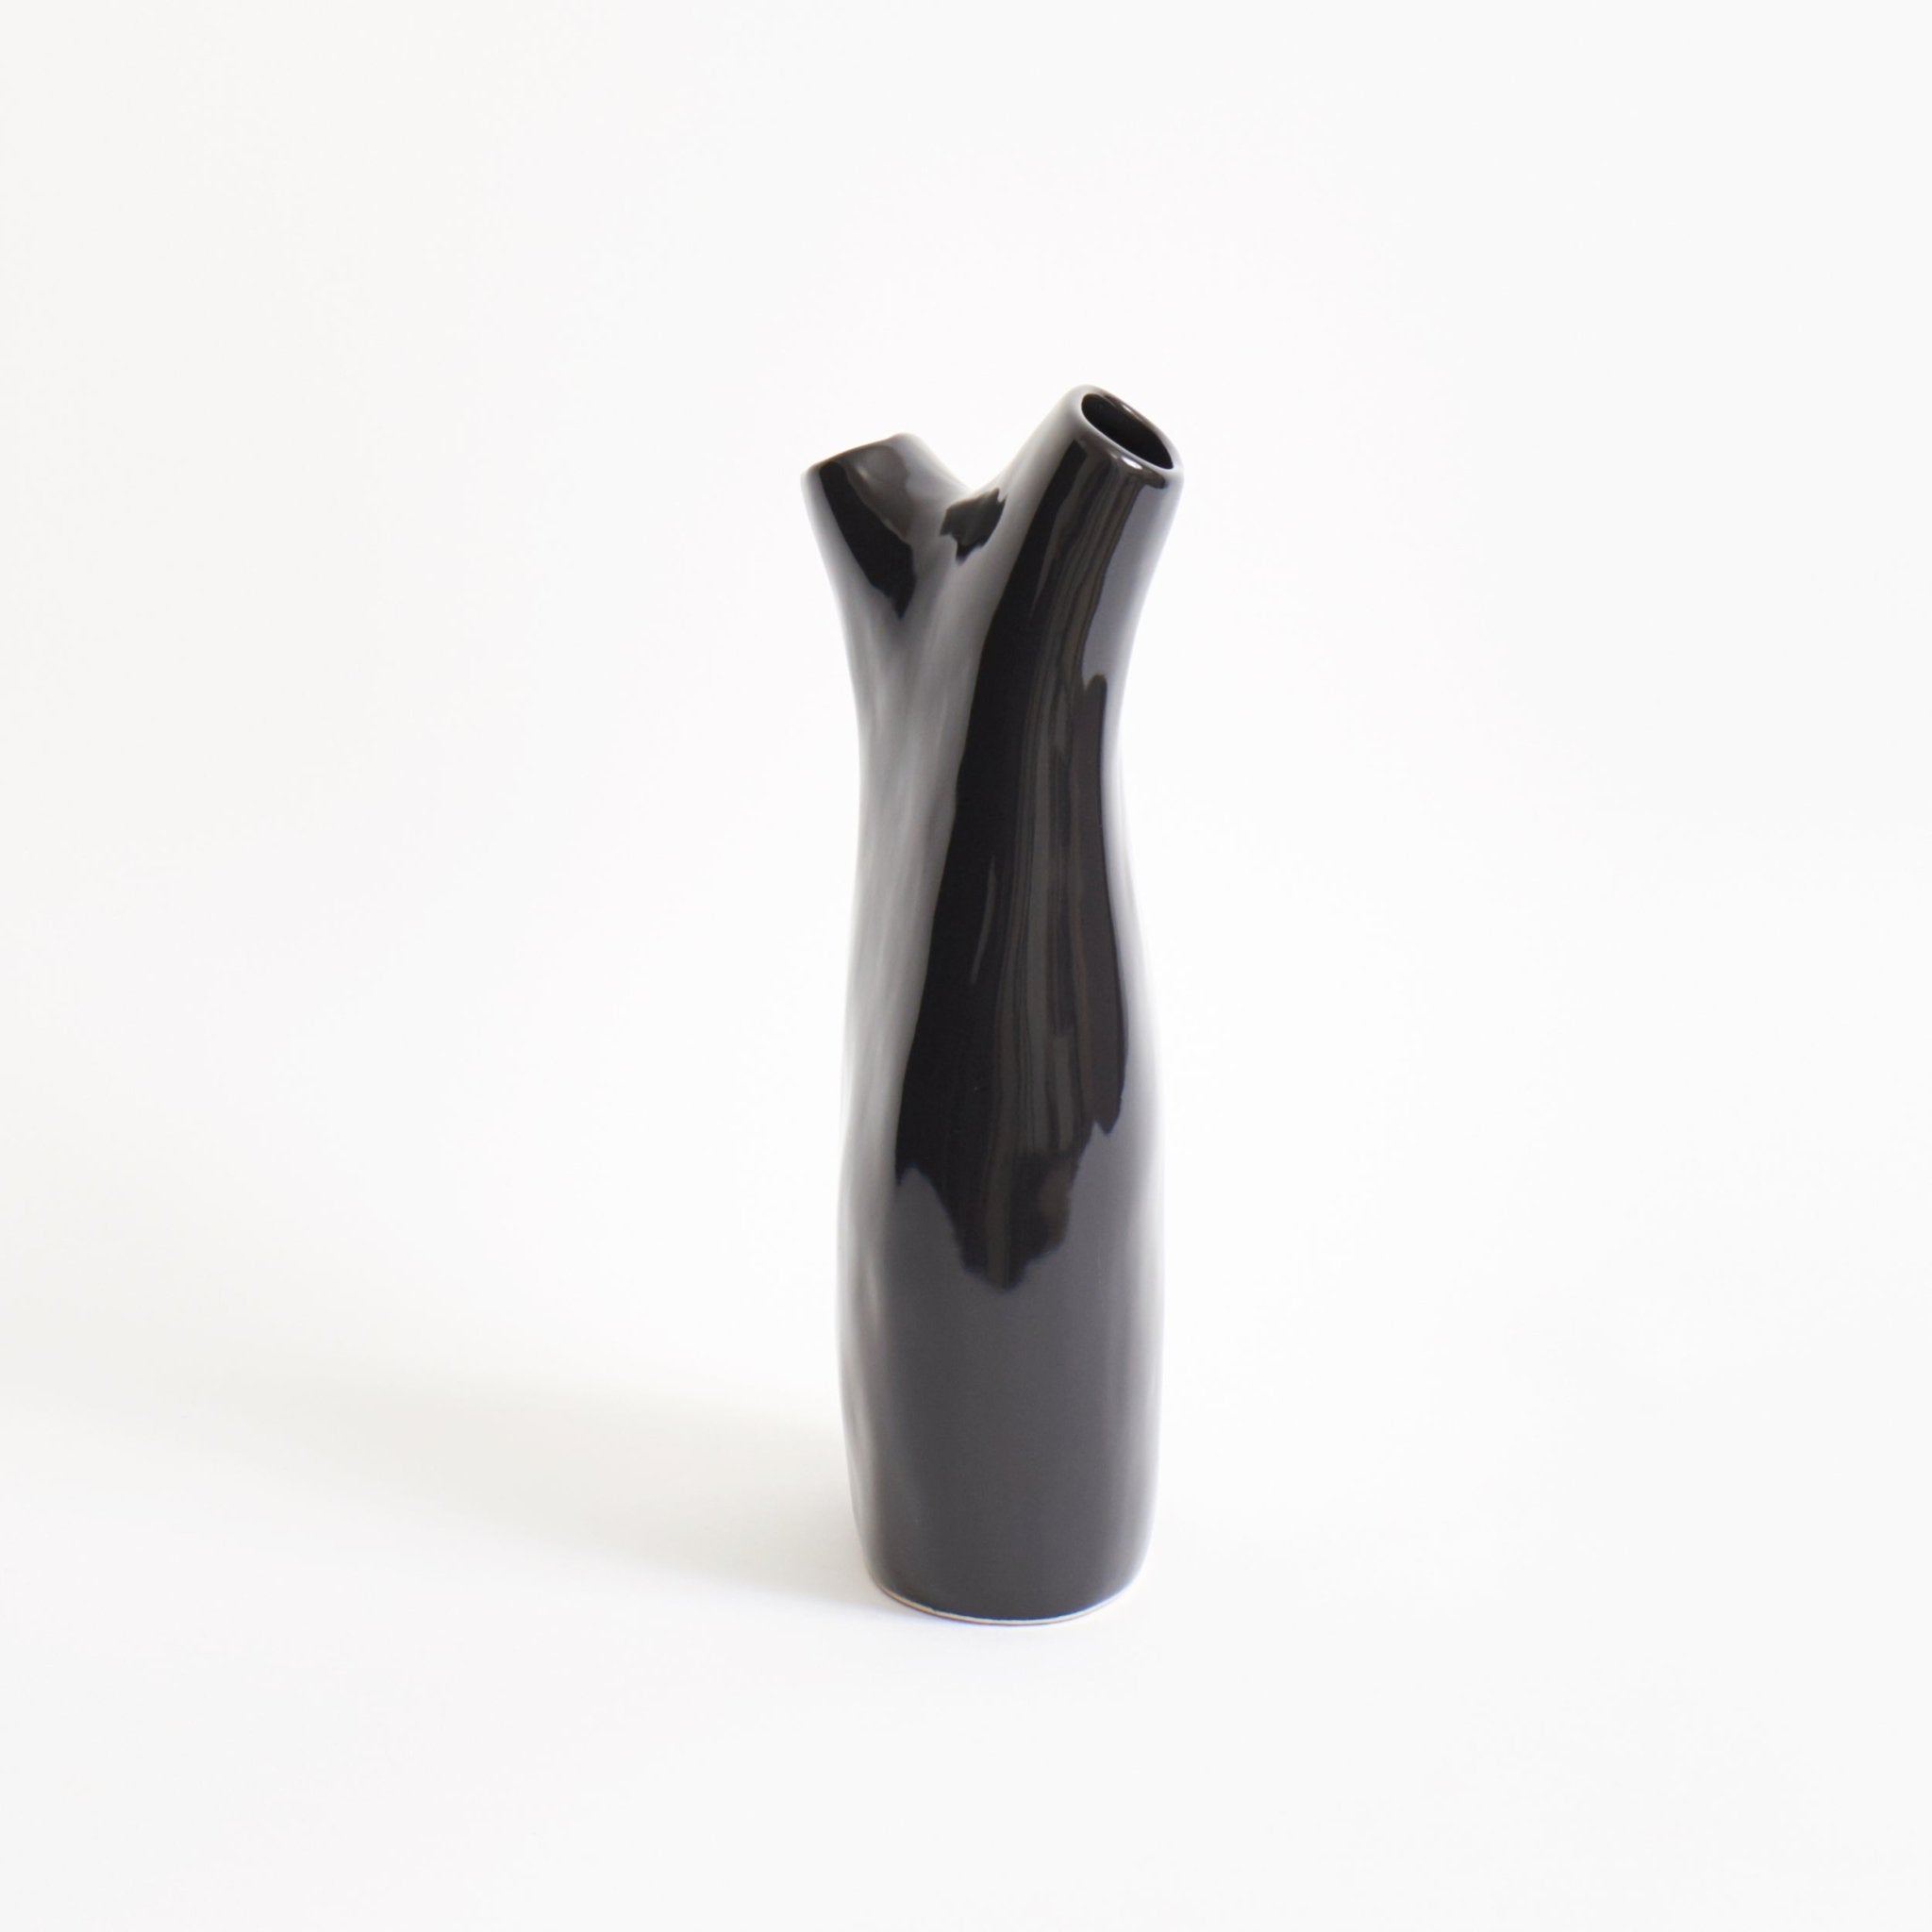 Gemini Vase - Gloss black vase by Project 213A